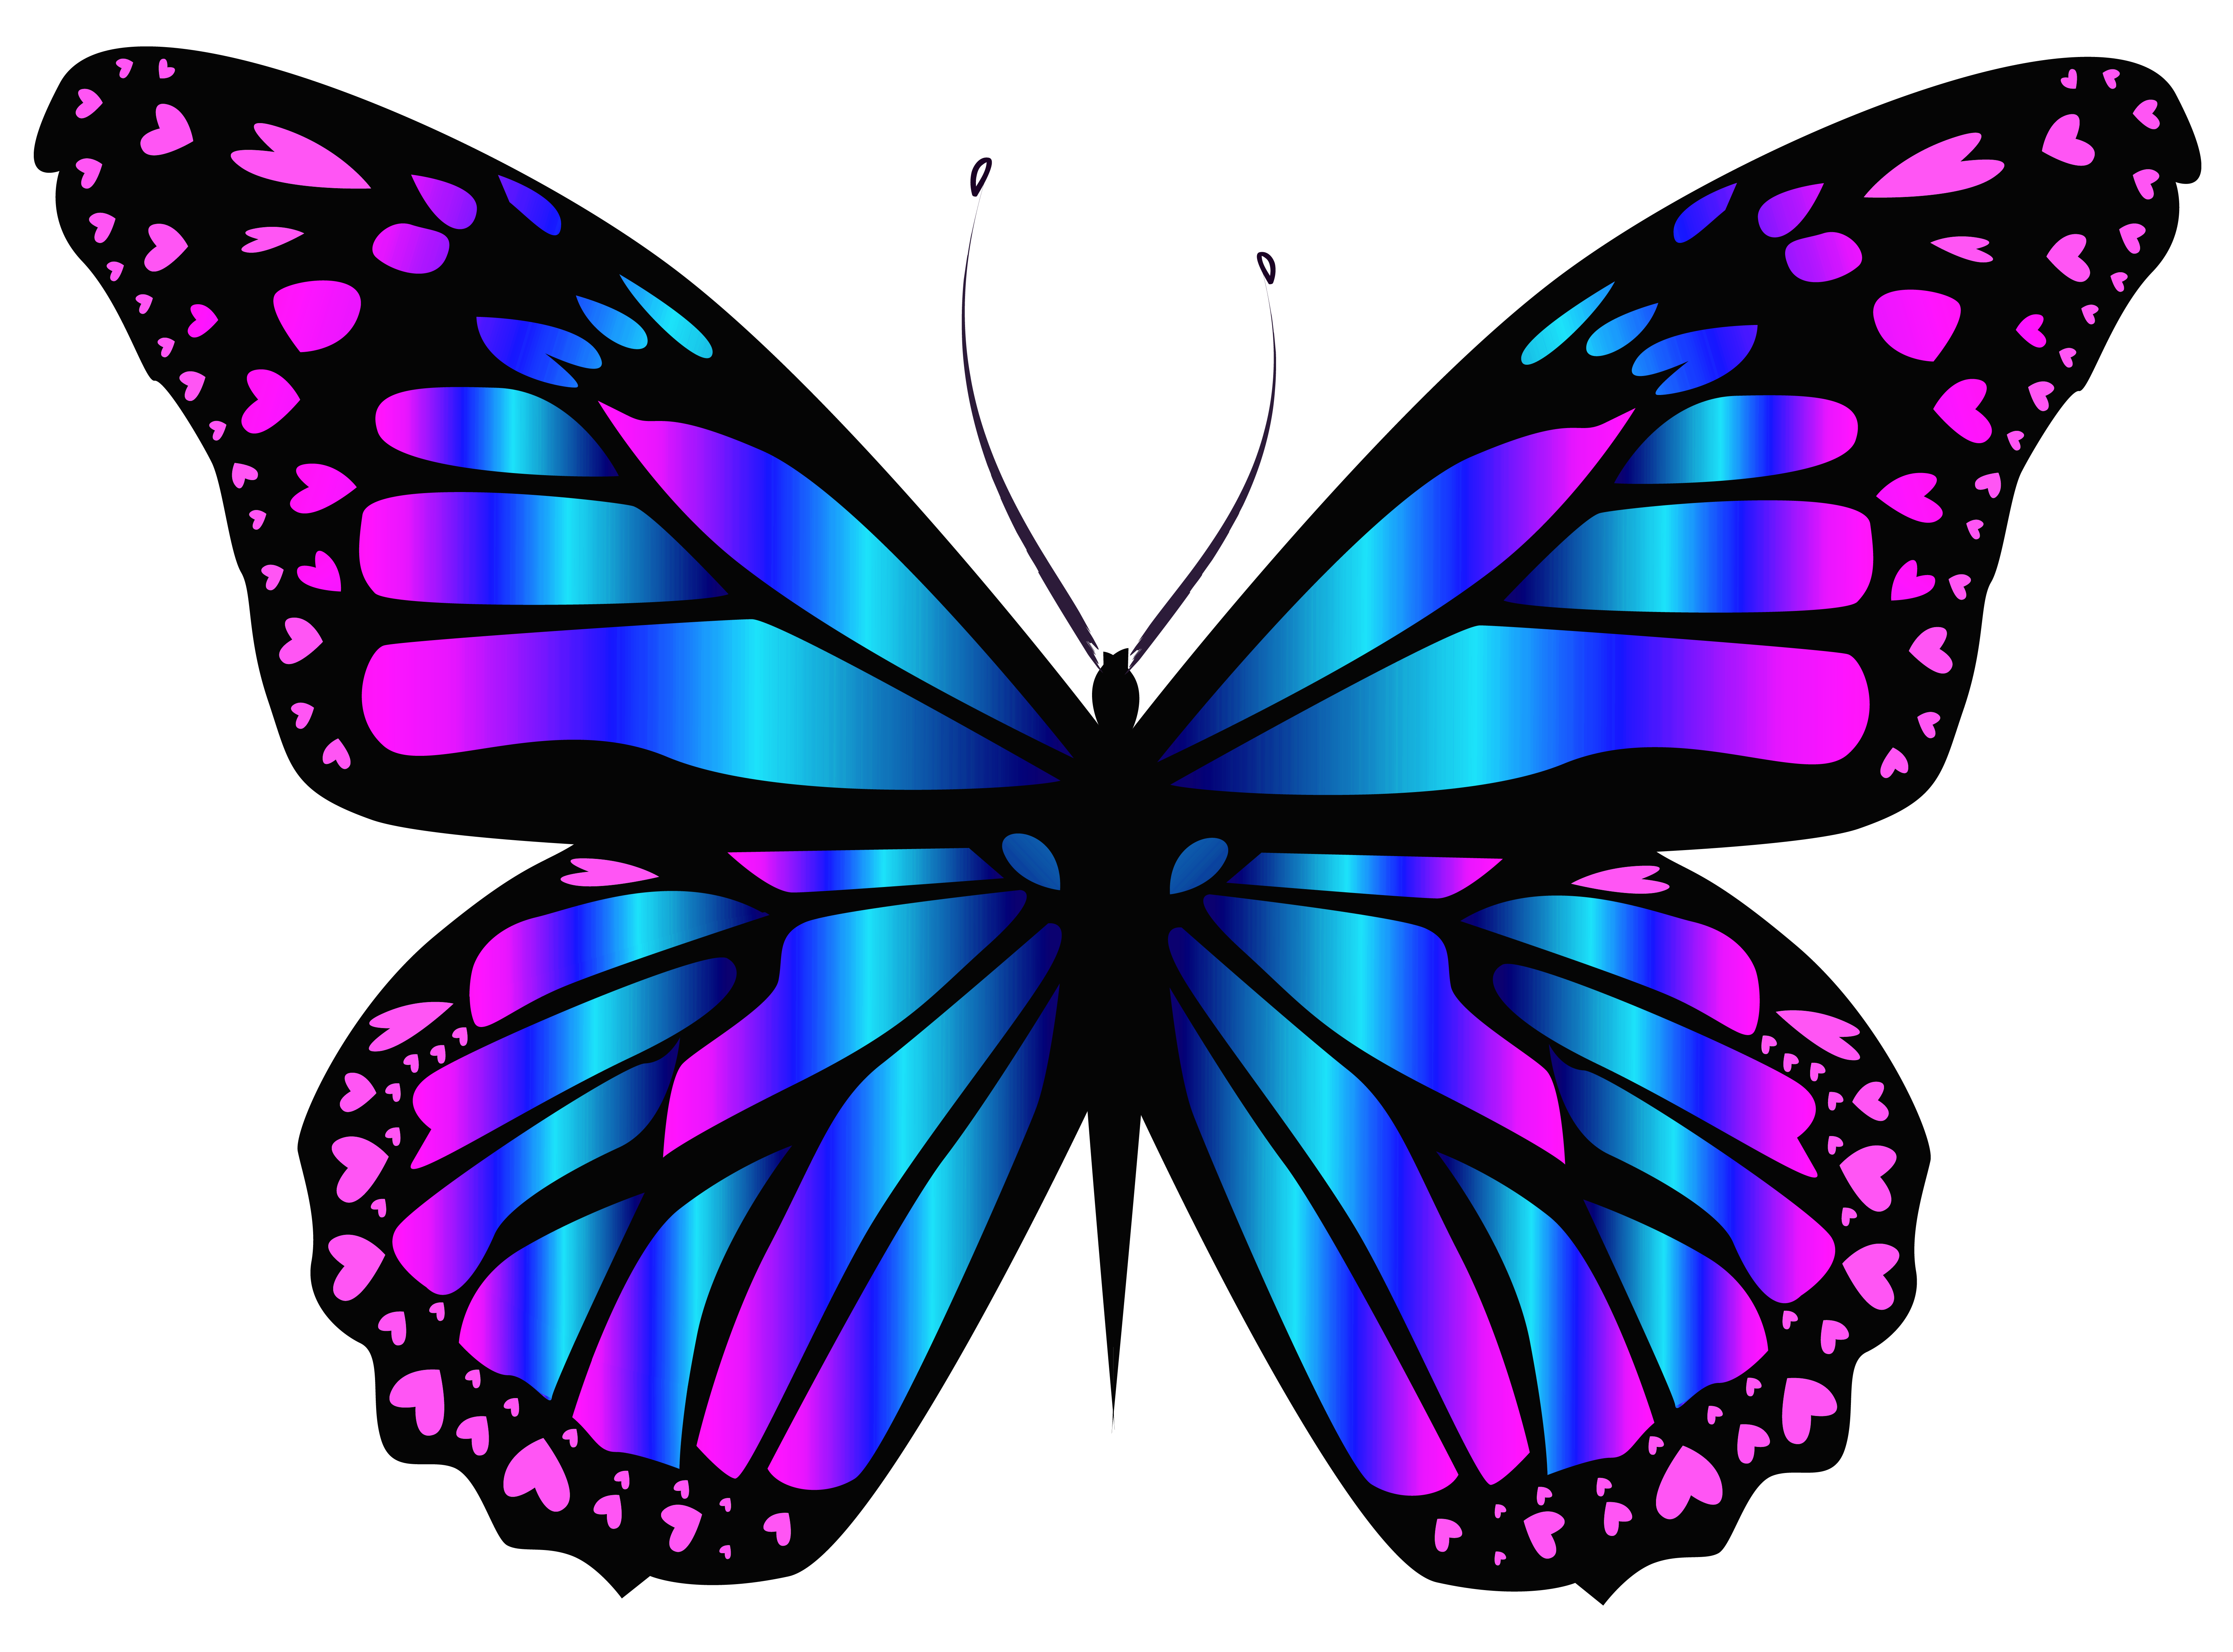 Blue and Purple Butterfly PNG Clipar Image | My favorite things too ...